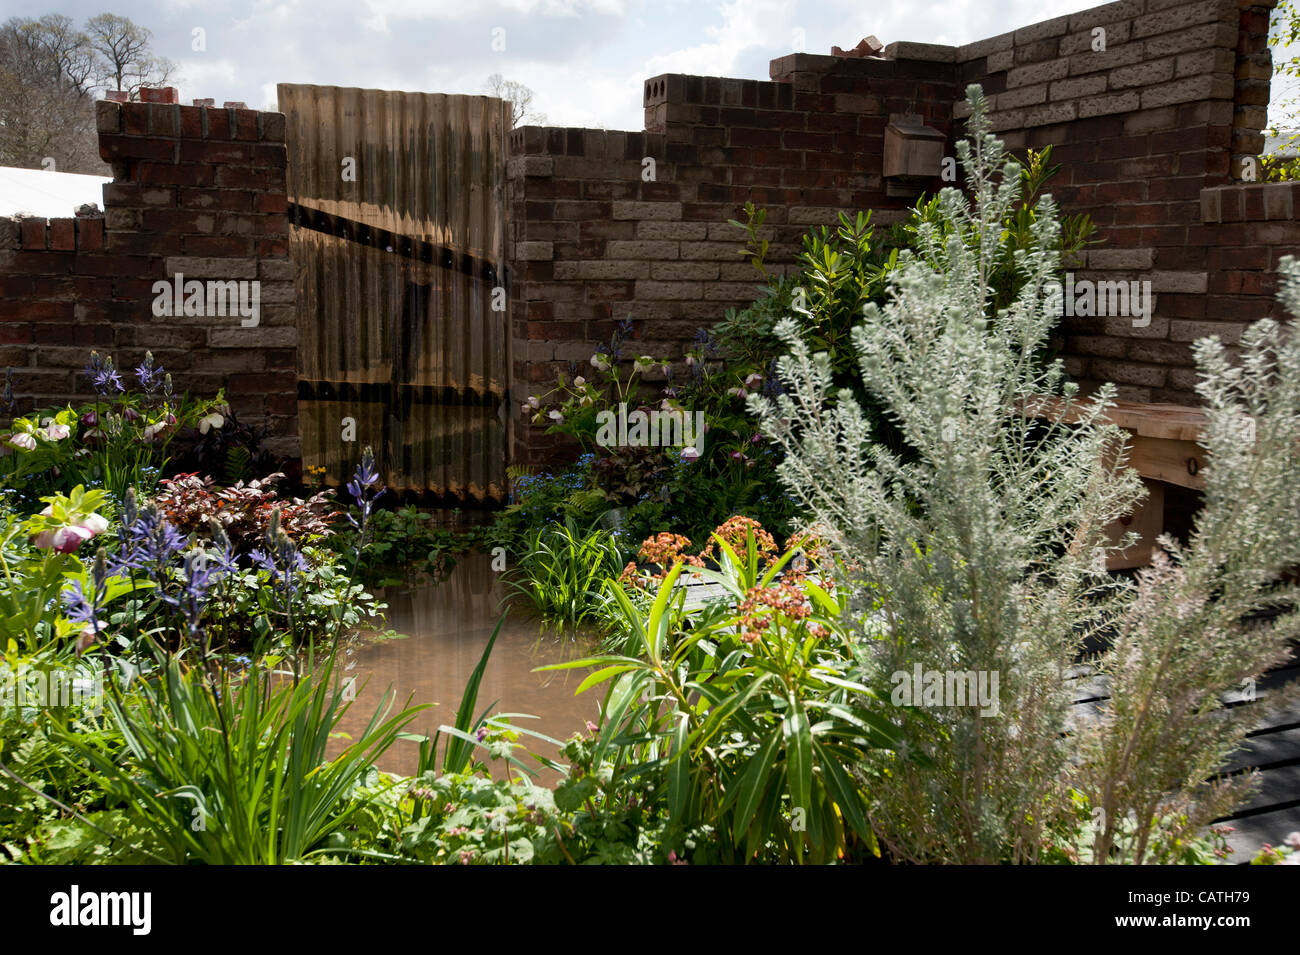 'Urban Oasis' show feature on Friday 20 April 2012, the first day of the RHS Show Cardiff in Bute Park, Wales, UK.  Demonstrating how small urban spaces can be transformed. Designed by Chris Beardshaw for Groundwork UK and the RHS, sponsored by Marks & Spencer. Stock Photo